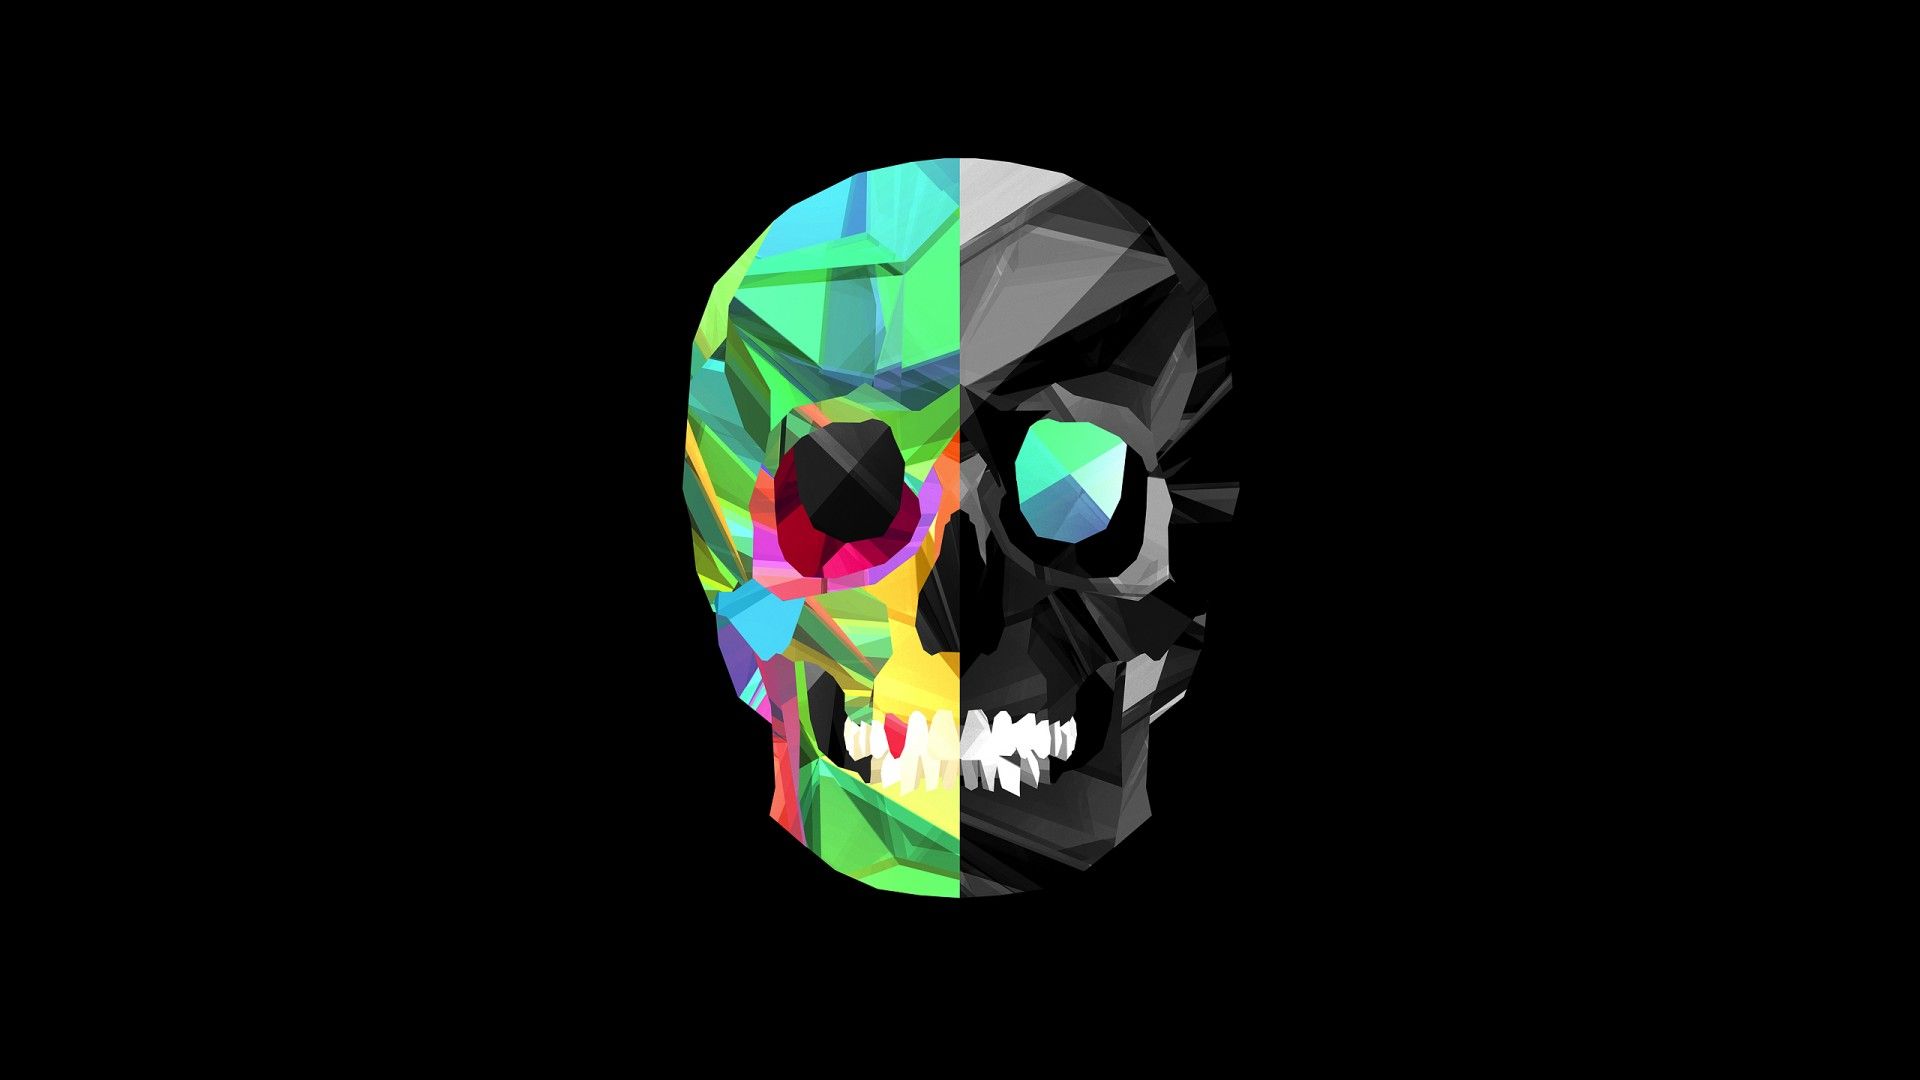 Download Awesome Skull Wallpaper 4602 1920x1080 px High Resolution ...